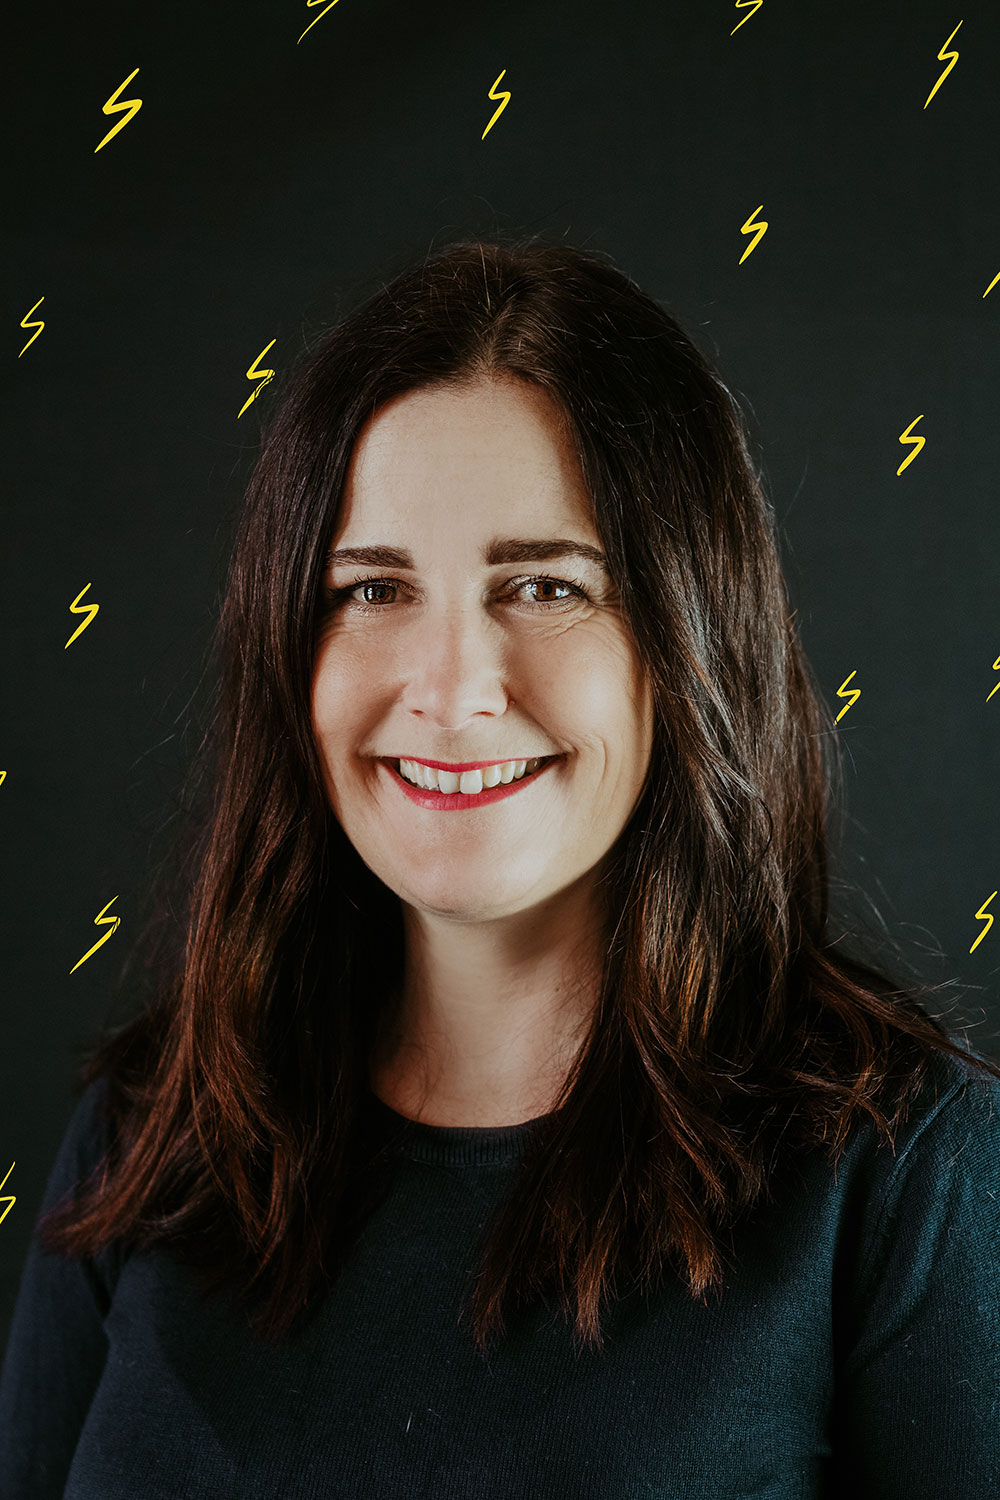 brunette woman against black background with yellow lightning bolts in background